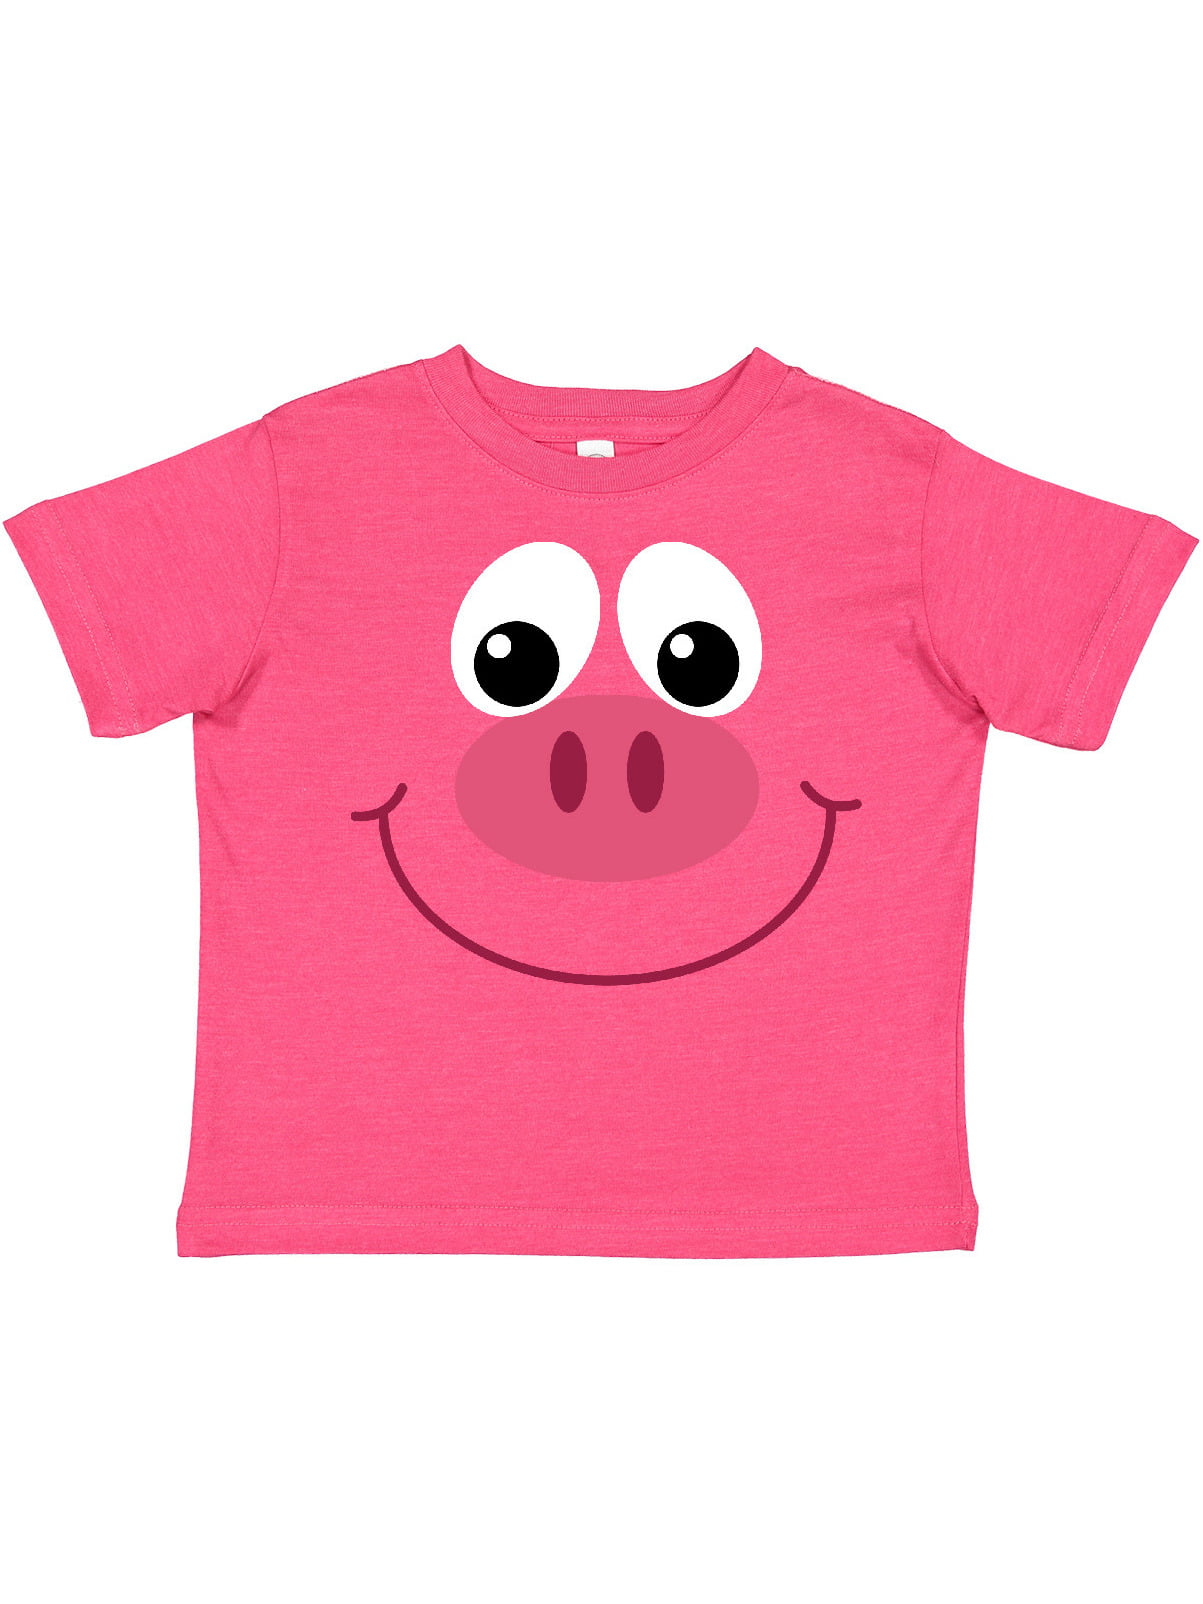 Pig Girl Face 2 Eyes Toddler or Child T-Shirt  ~ Personalized 